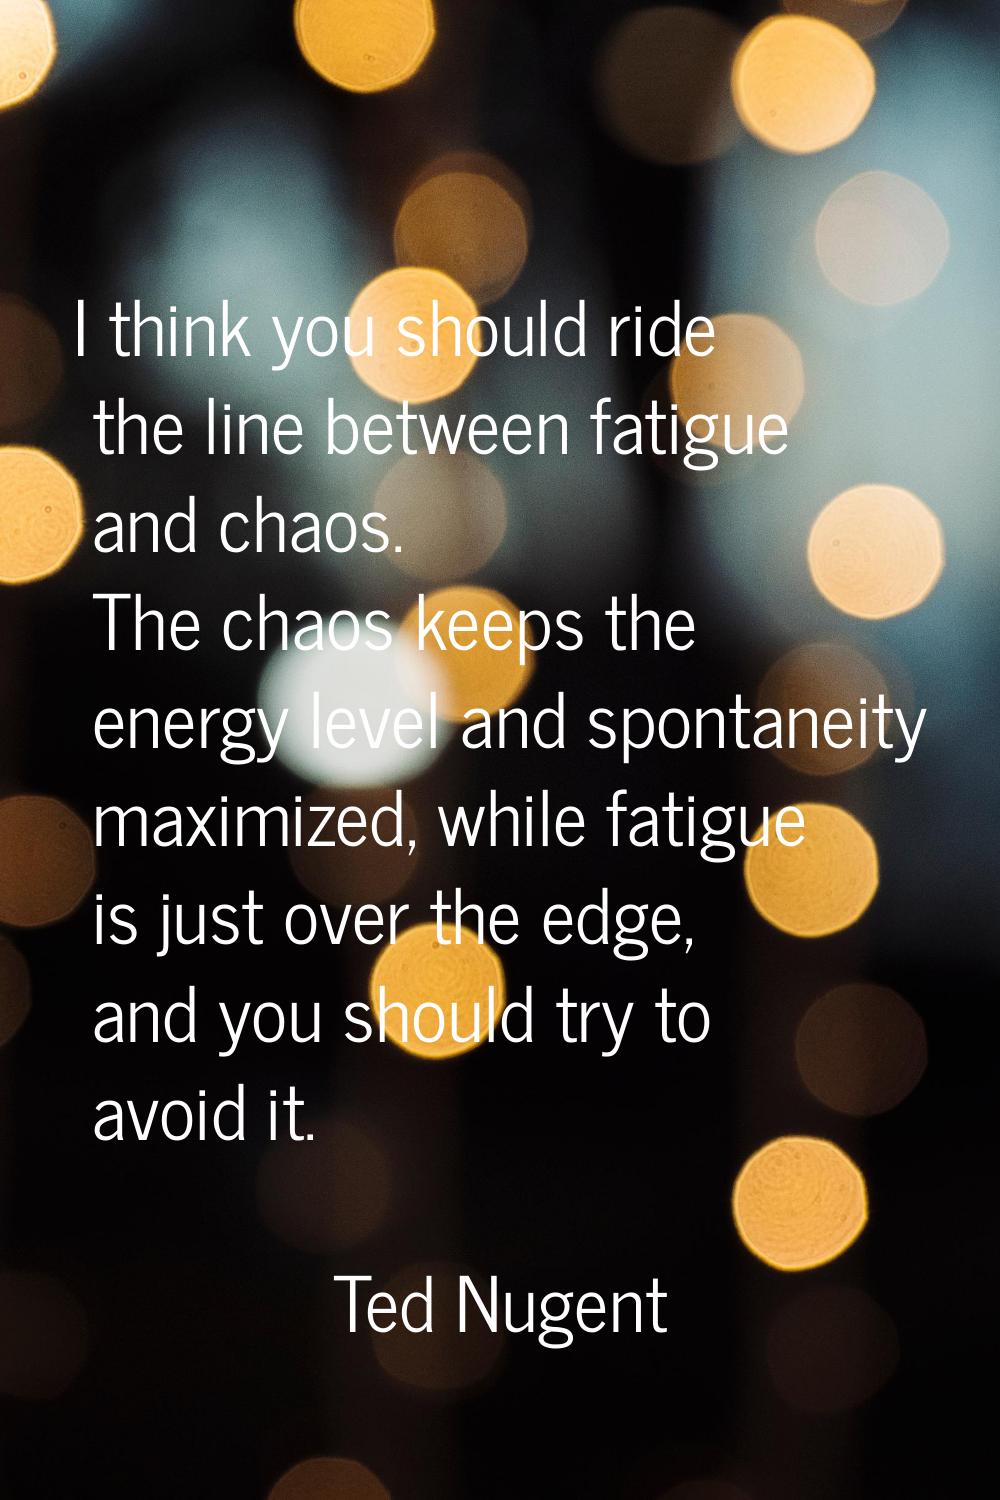 I think you should ride the line between fatigue and chaos. The chaos keeps the energy level and sp